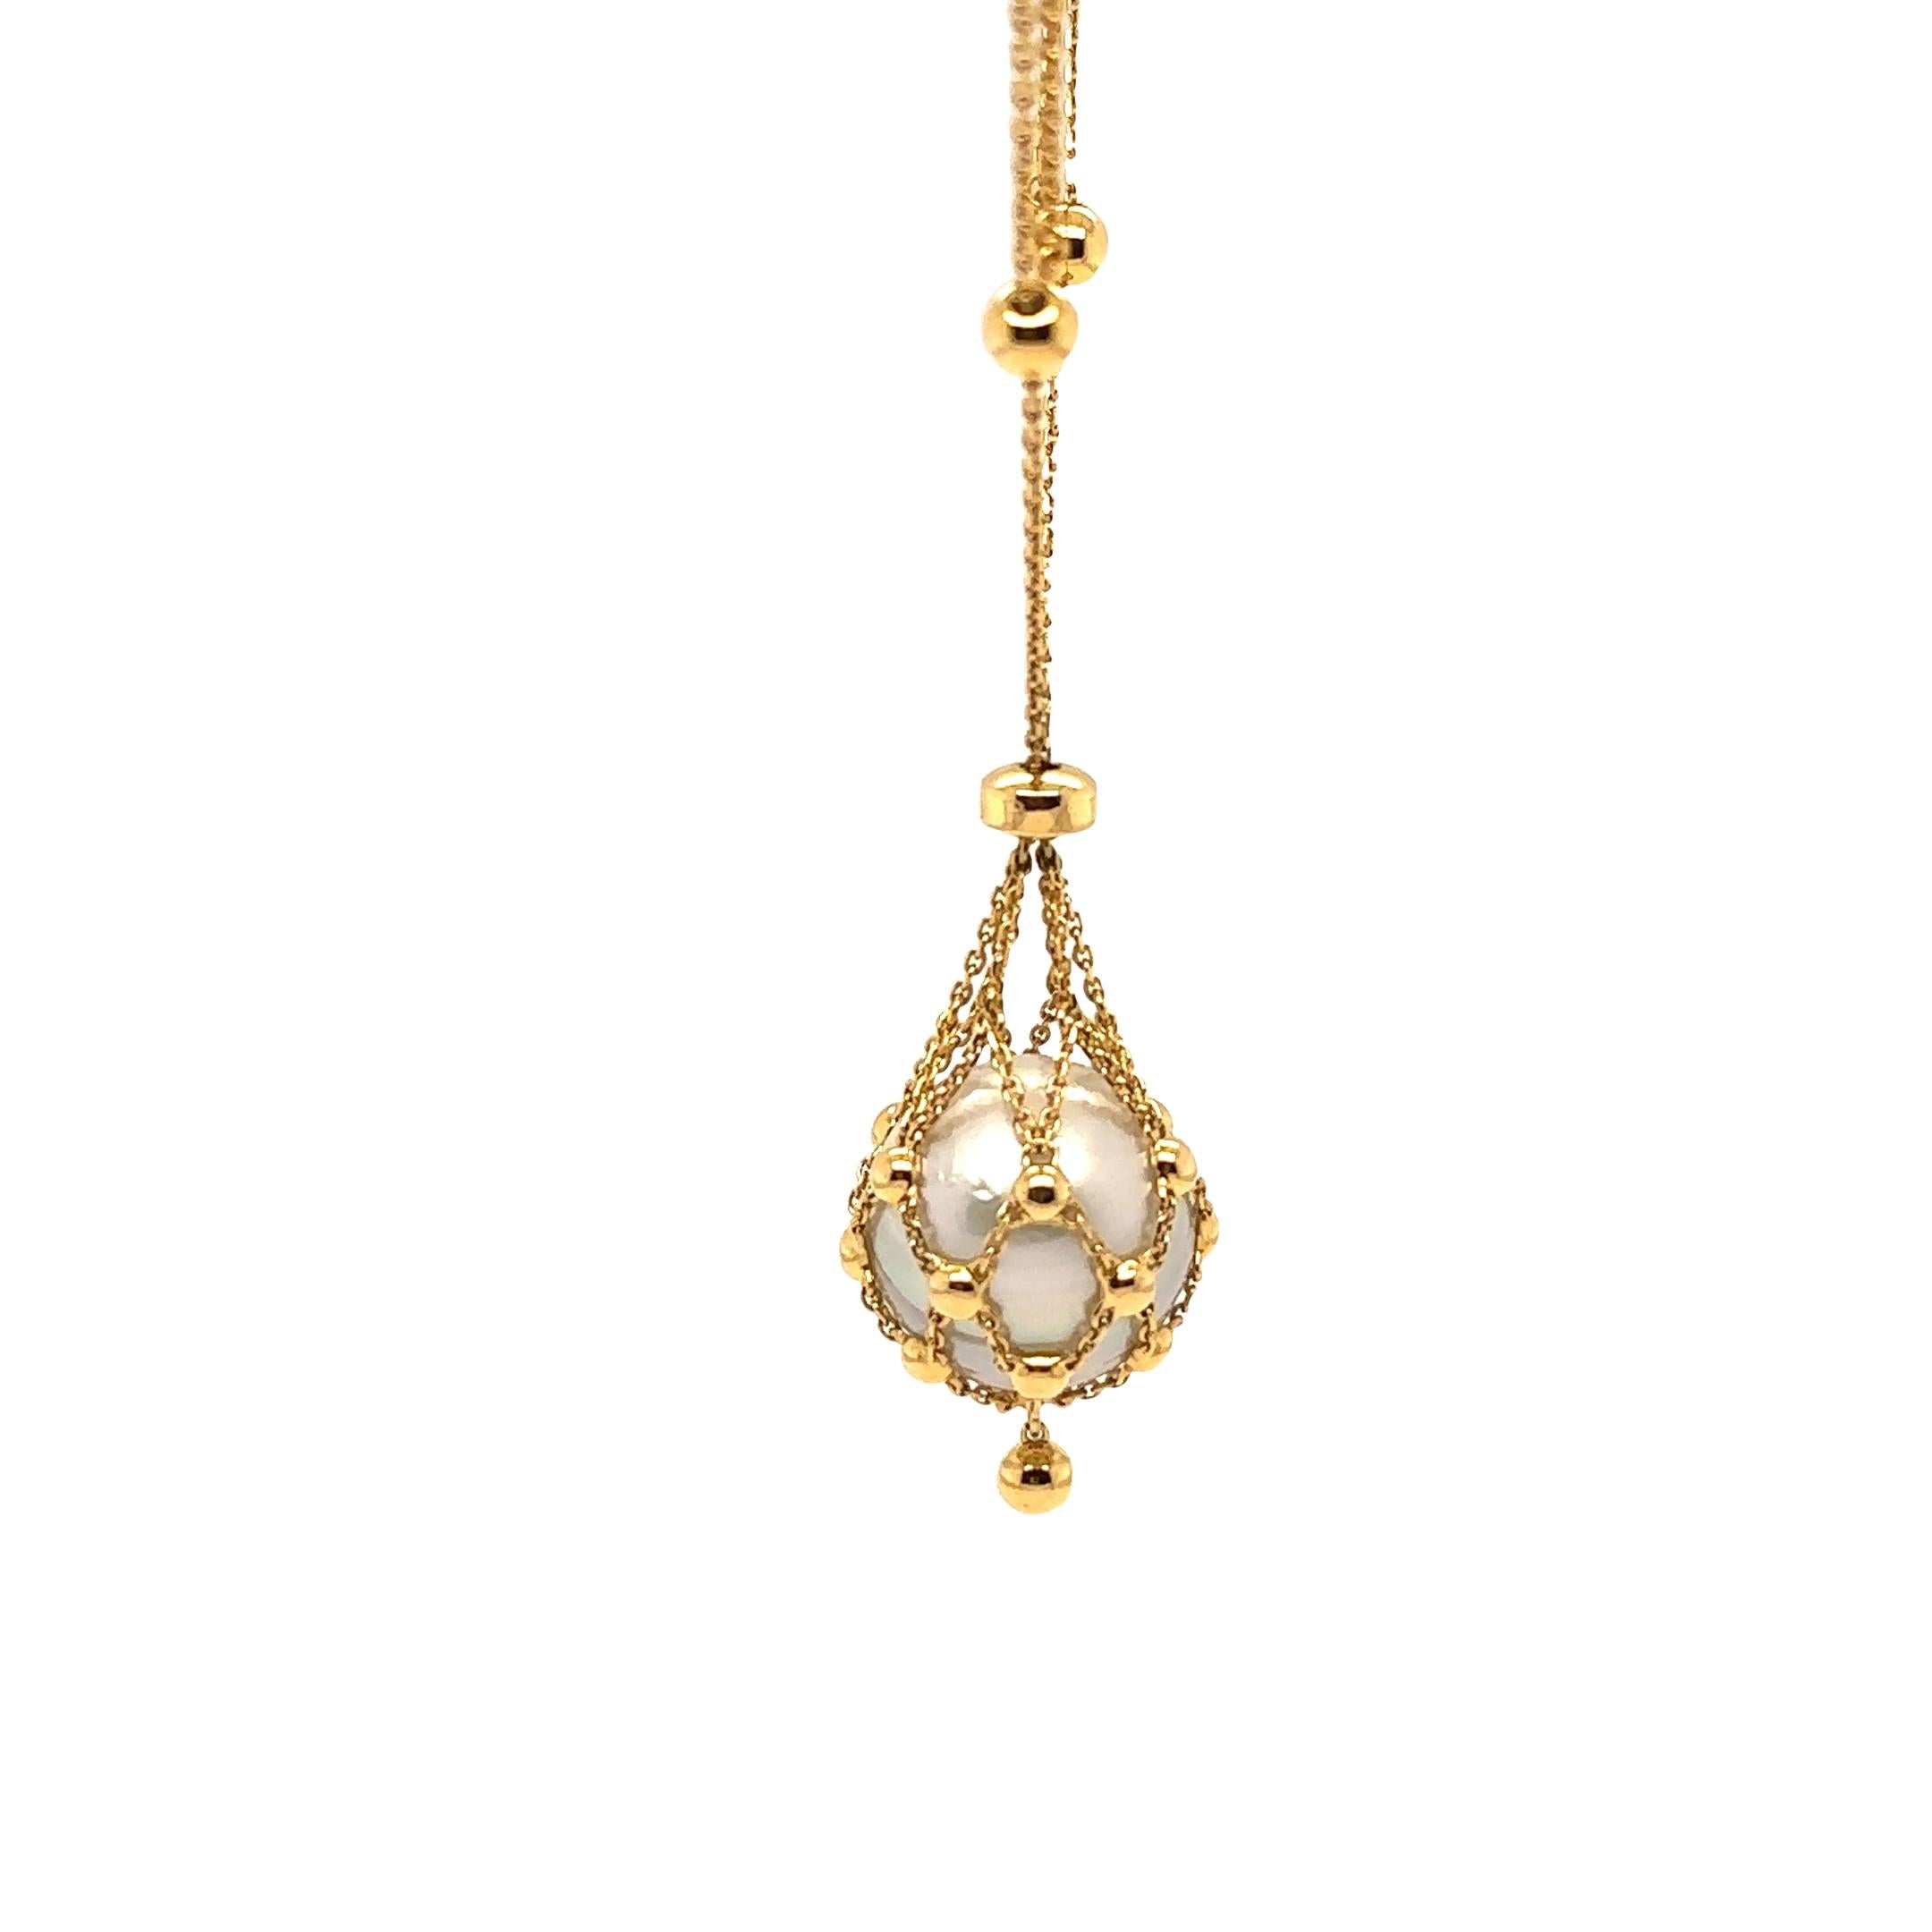 Paspaley Lavalier necklace. Made of 18ct Yellow Gold, length adjustable 40-73 cm, and weighing 14.4 gm.

Featuring a loose 15 mm South Sea Round Pearl.

The clasp is set with 12 round, brilliant cut Diamonds, colour F and clarity VS. with a total